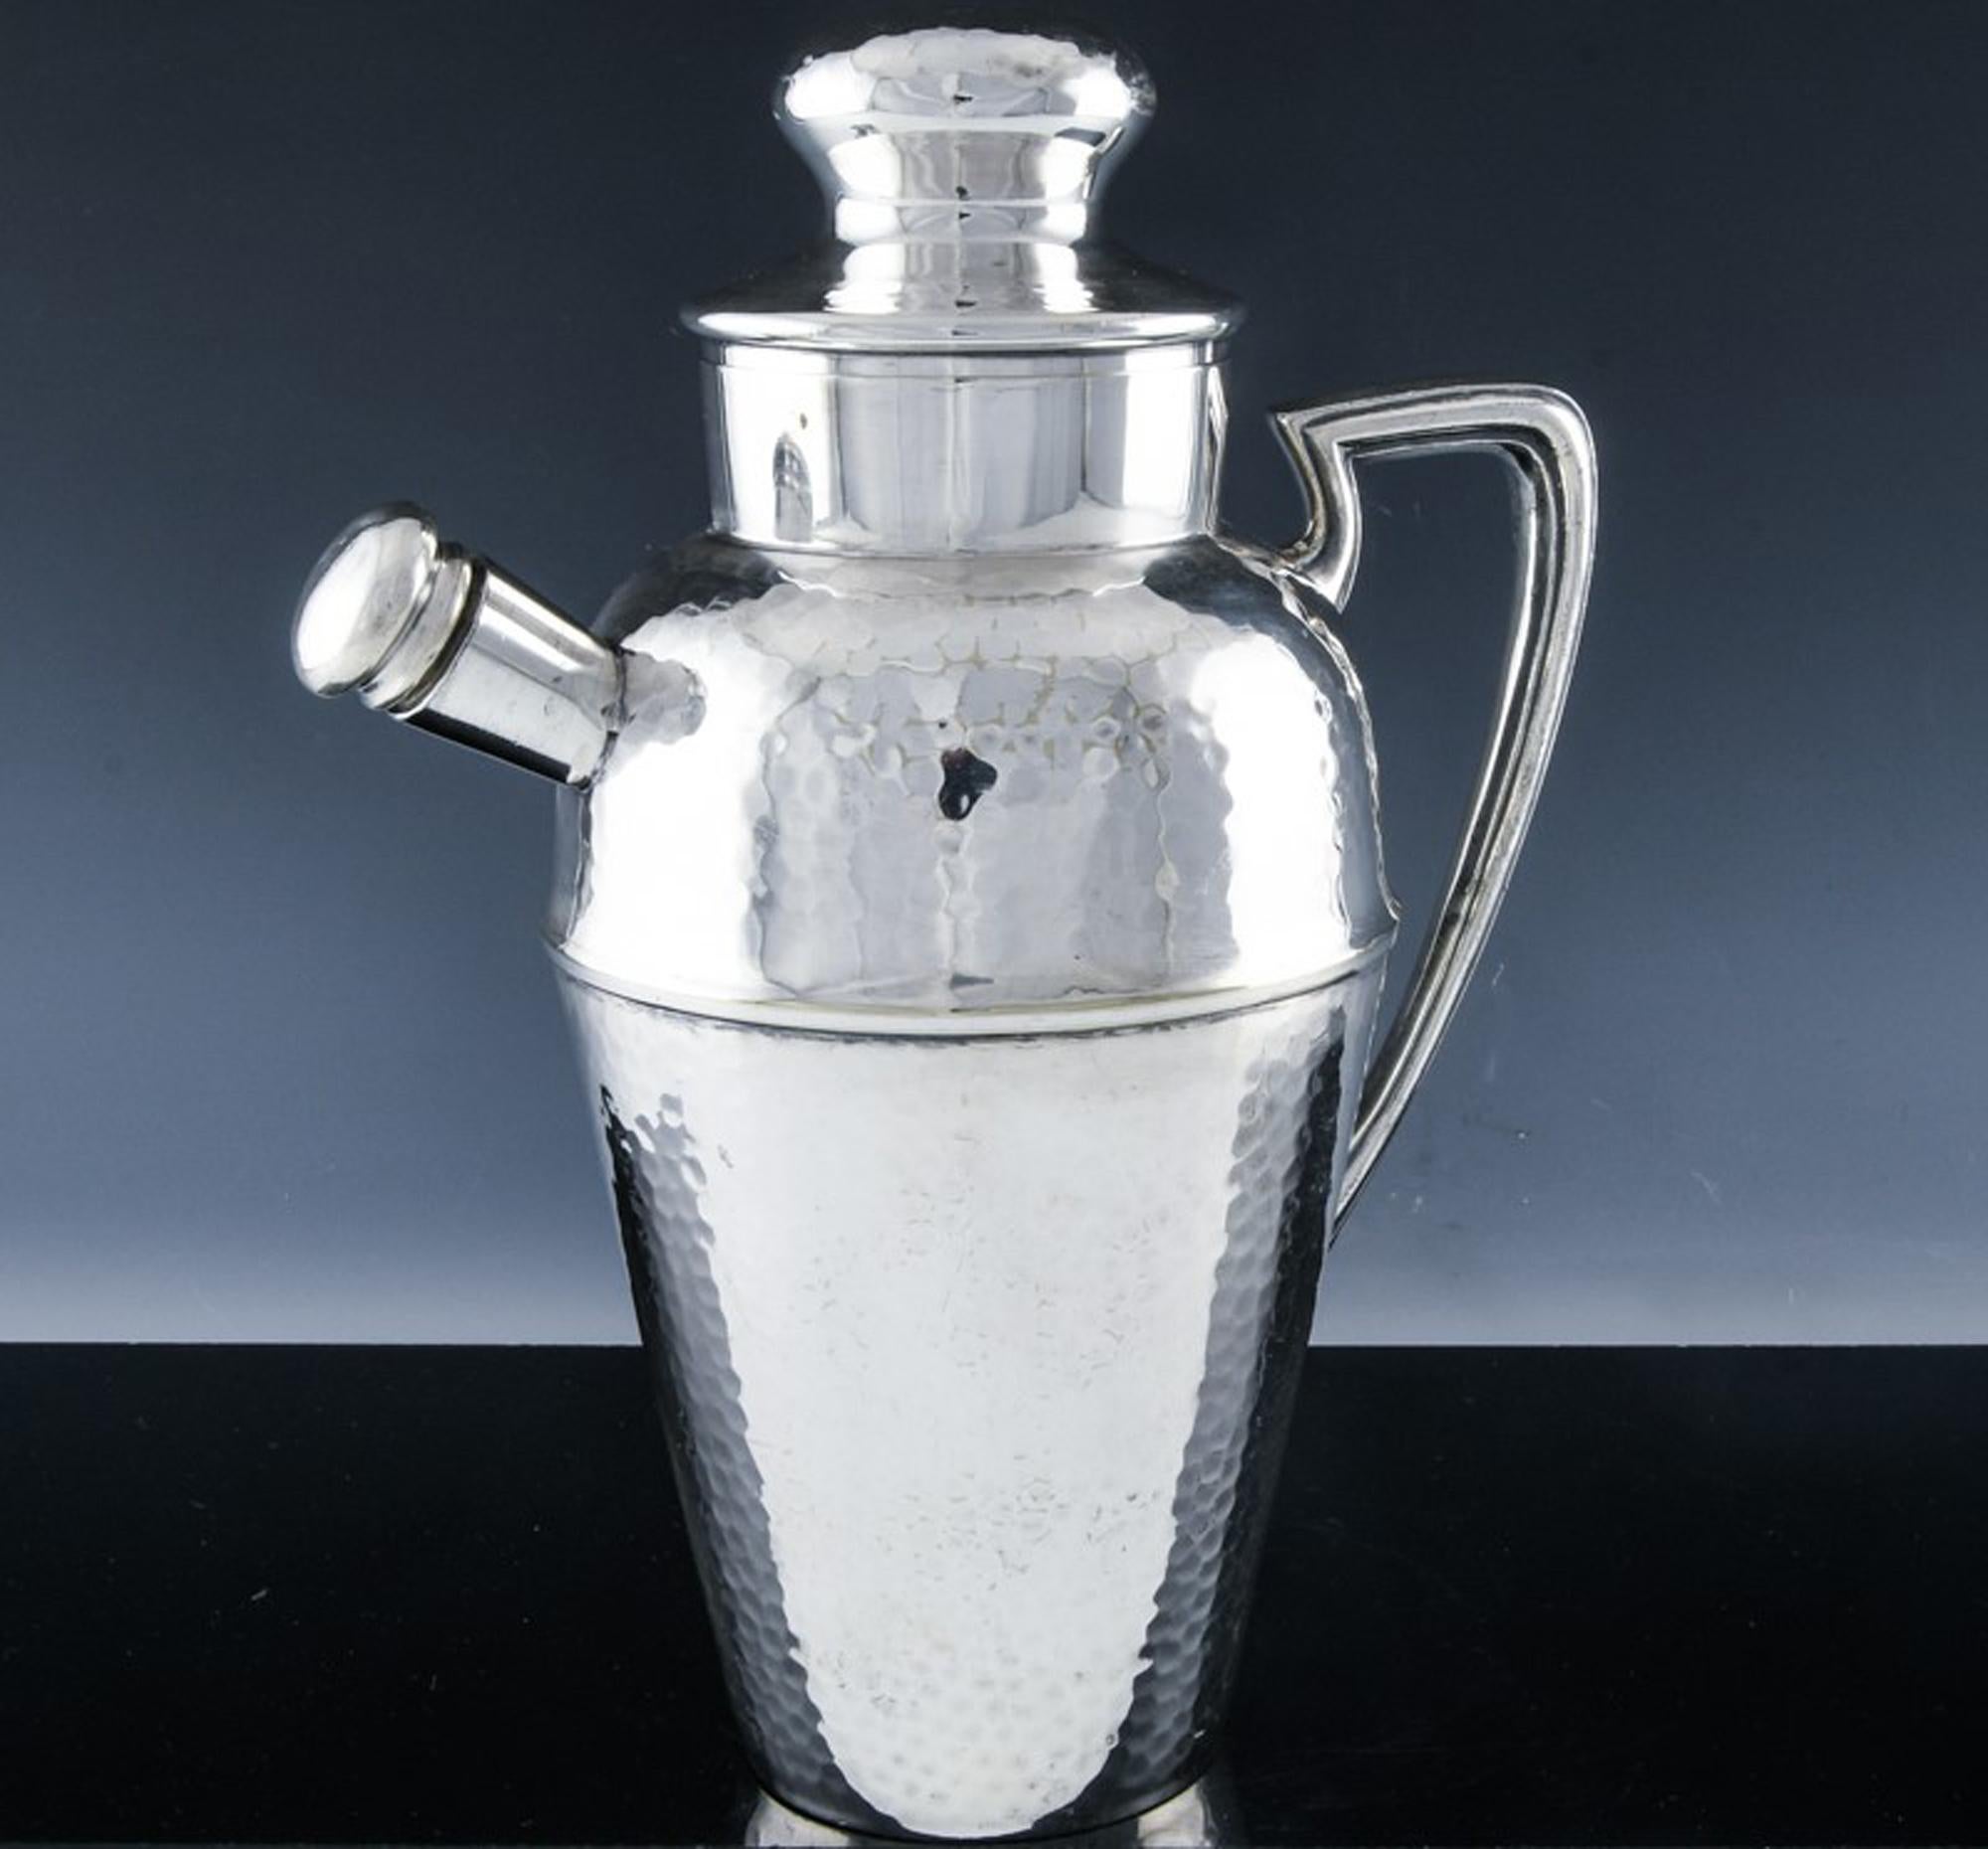 Silver plate cocktail and Martine shaker and pitcher,
1930s
(Ref: 9475-unx)

This cocktail shaker is a very fine quality silver plate example. The body is hammered and has an Art Deco form.

The interior has a wide perforated lip so one can